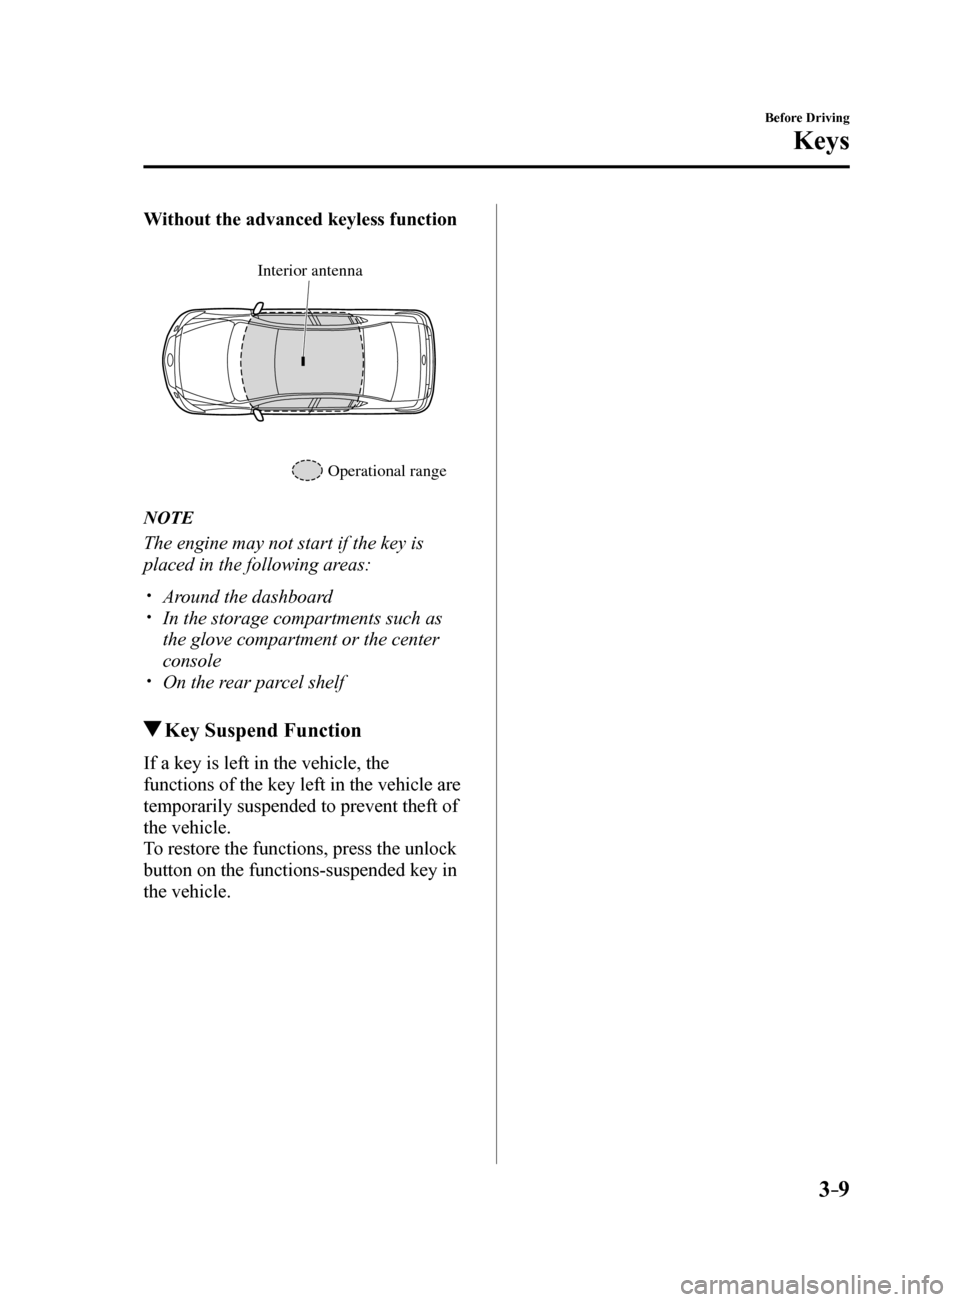 MAZDA MODEL 6 2017  Owners Manual (in English) 3–9
Before Driving
Keys
Without the advanced keyless function
Interior antenna
Operational range
NOTE
The engine may not start if the key is 
placed in the following areas:
 Around the dashboard�